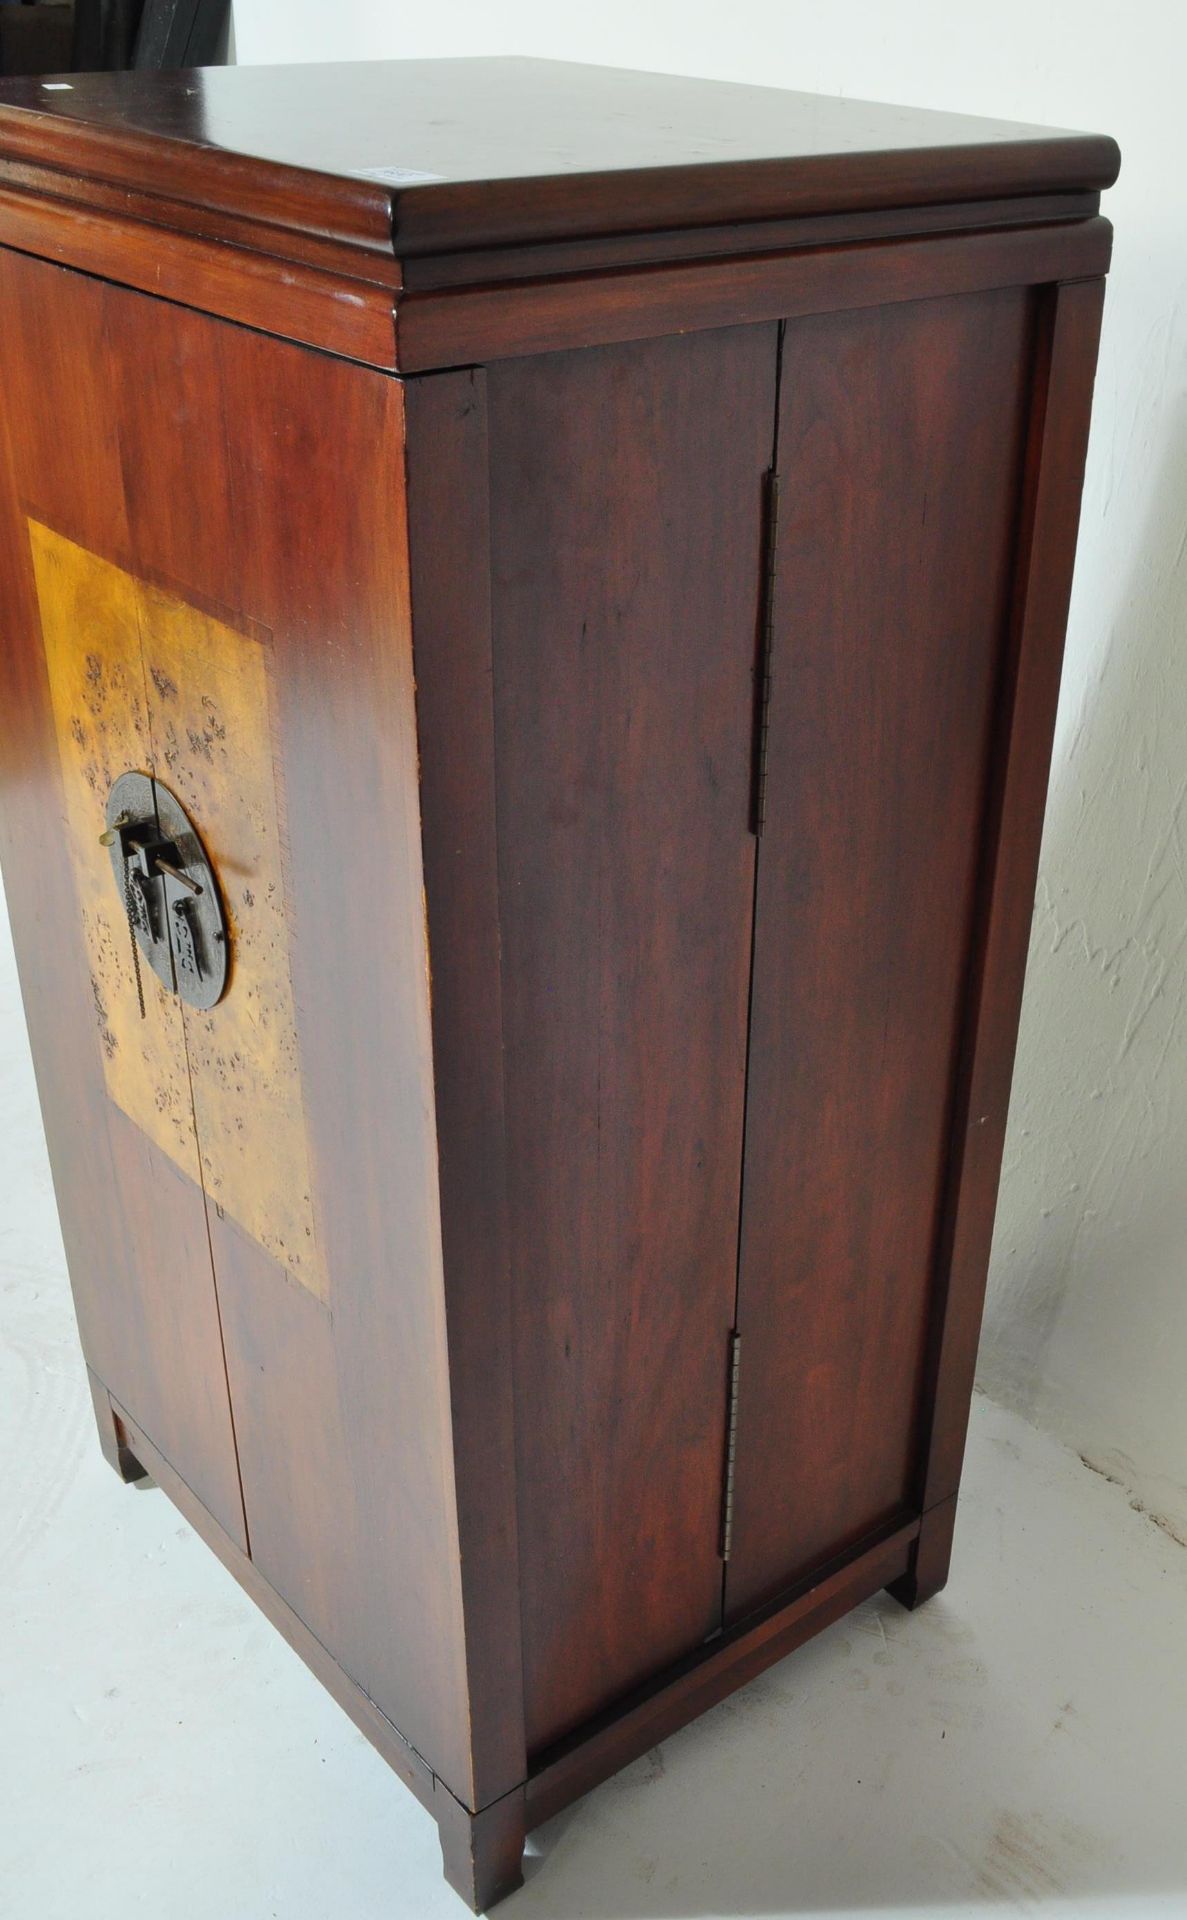 VINTAGE 20TH CENTURY CHINESE UPRIGHT PEDESTAL CABINET - Image 6 of 7